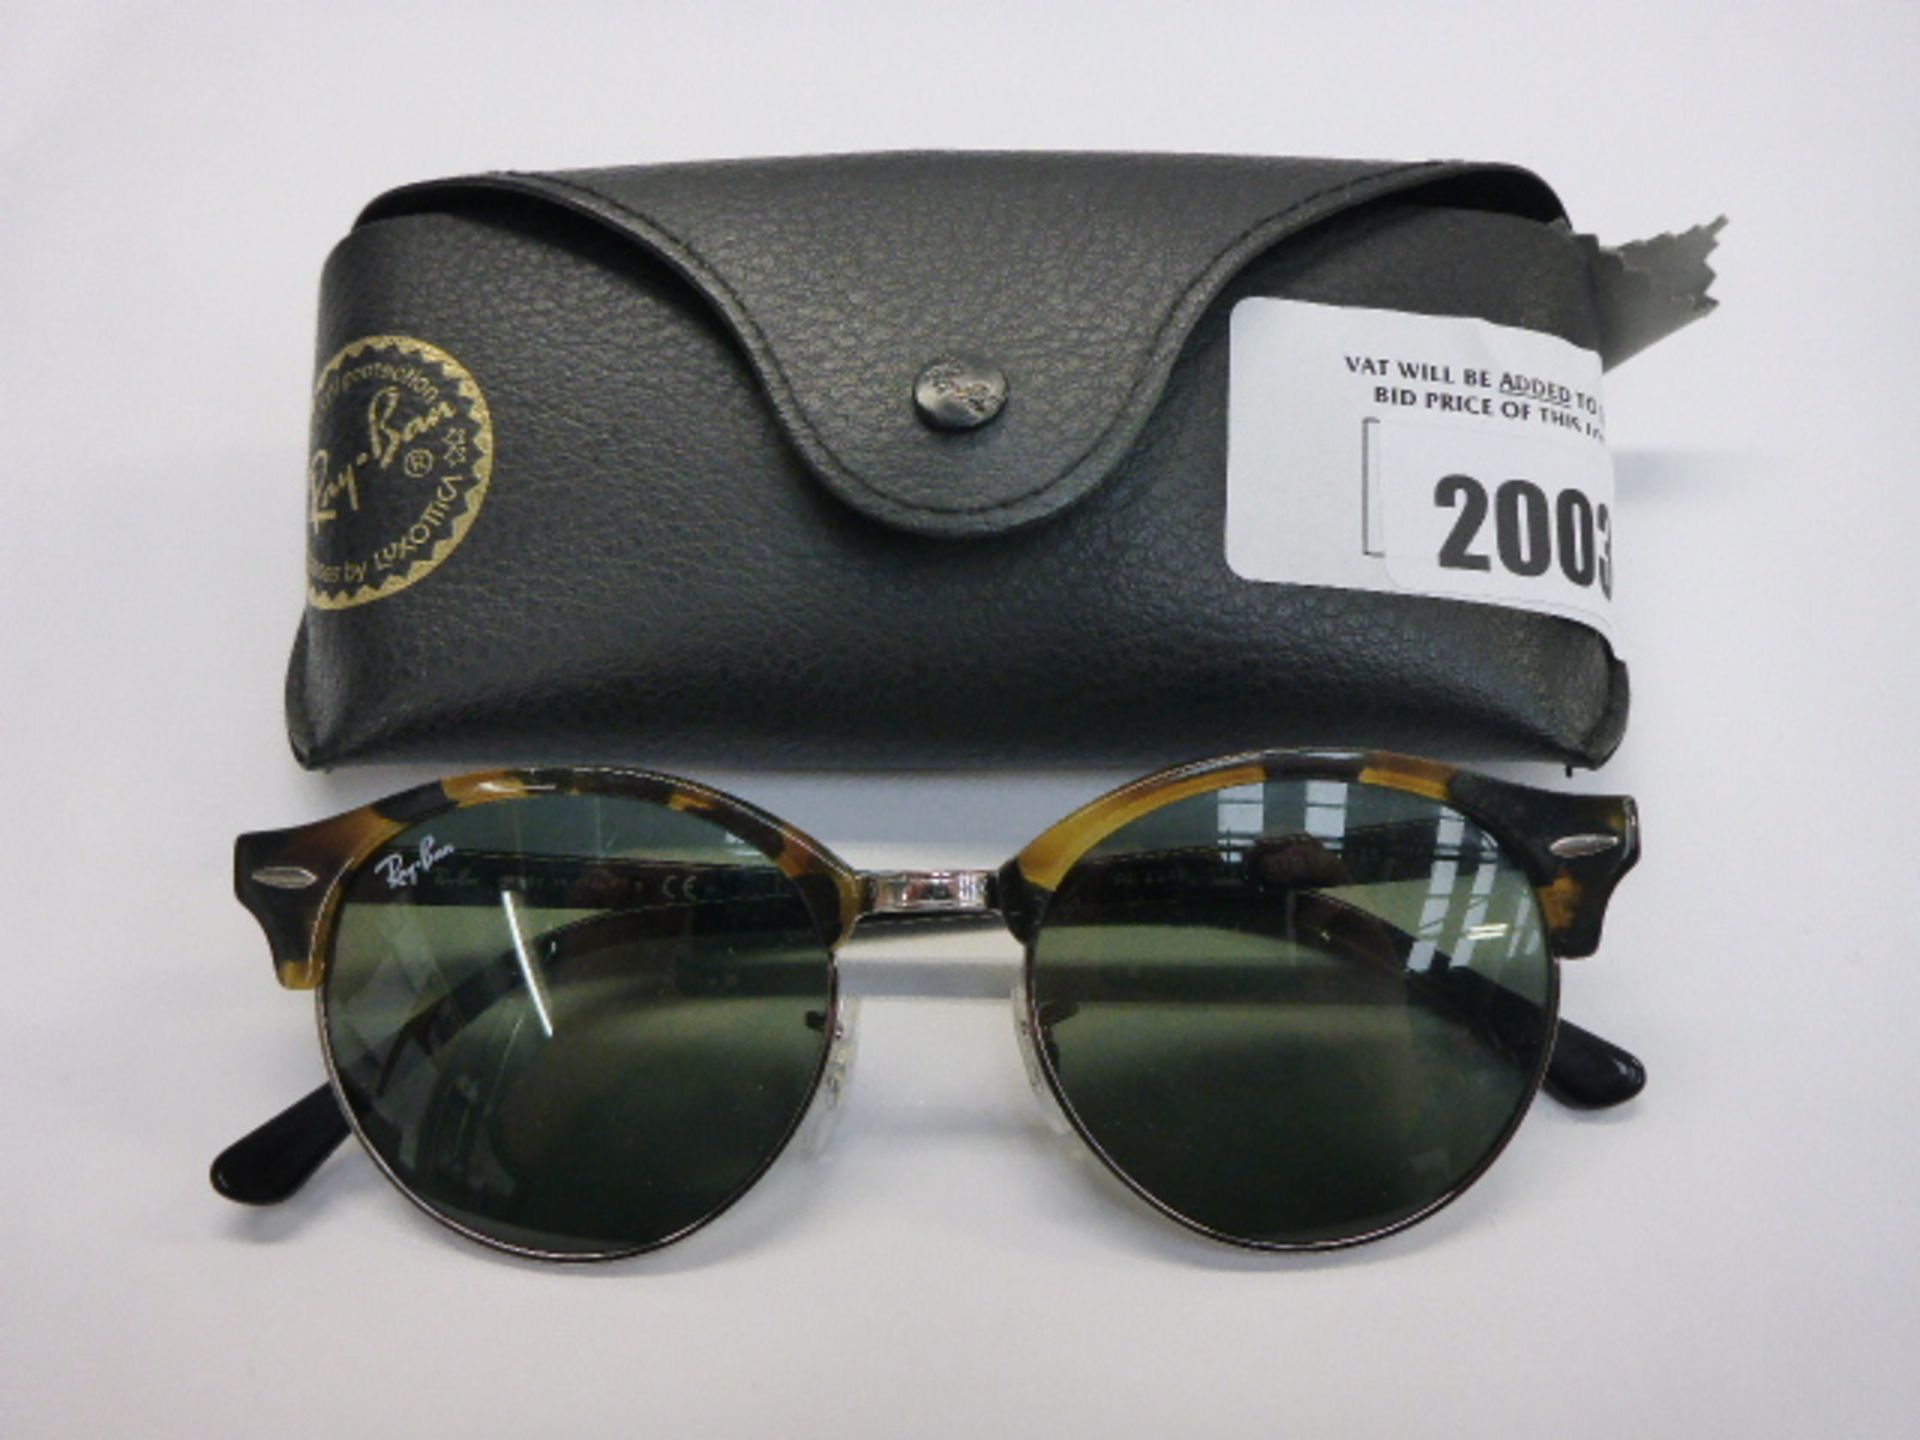 Ray-Ban RB-1157 sunglasses with hard case